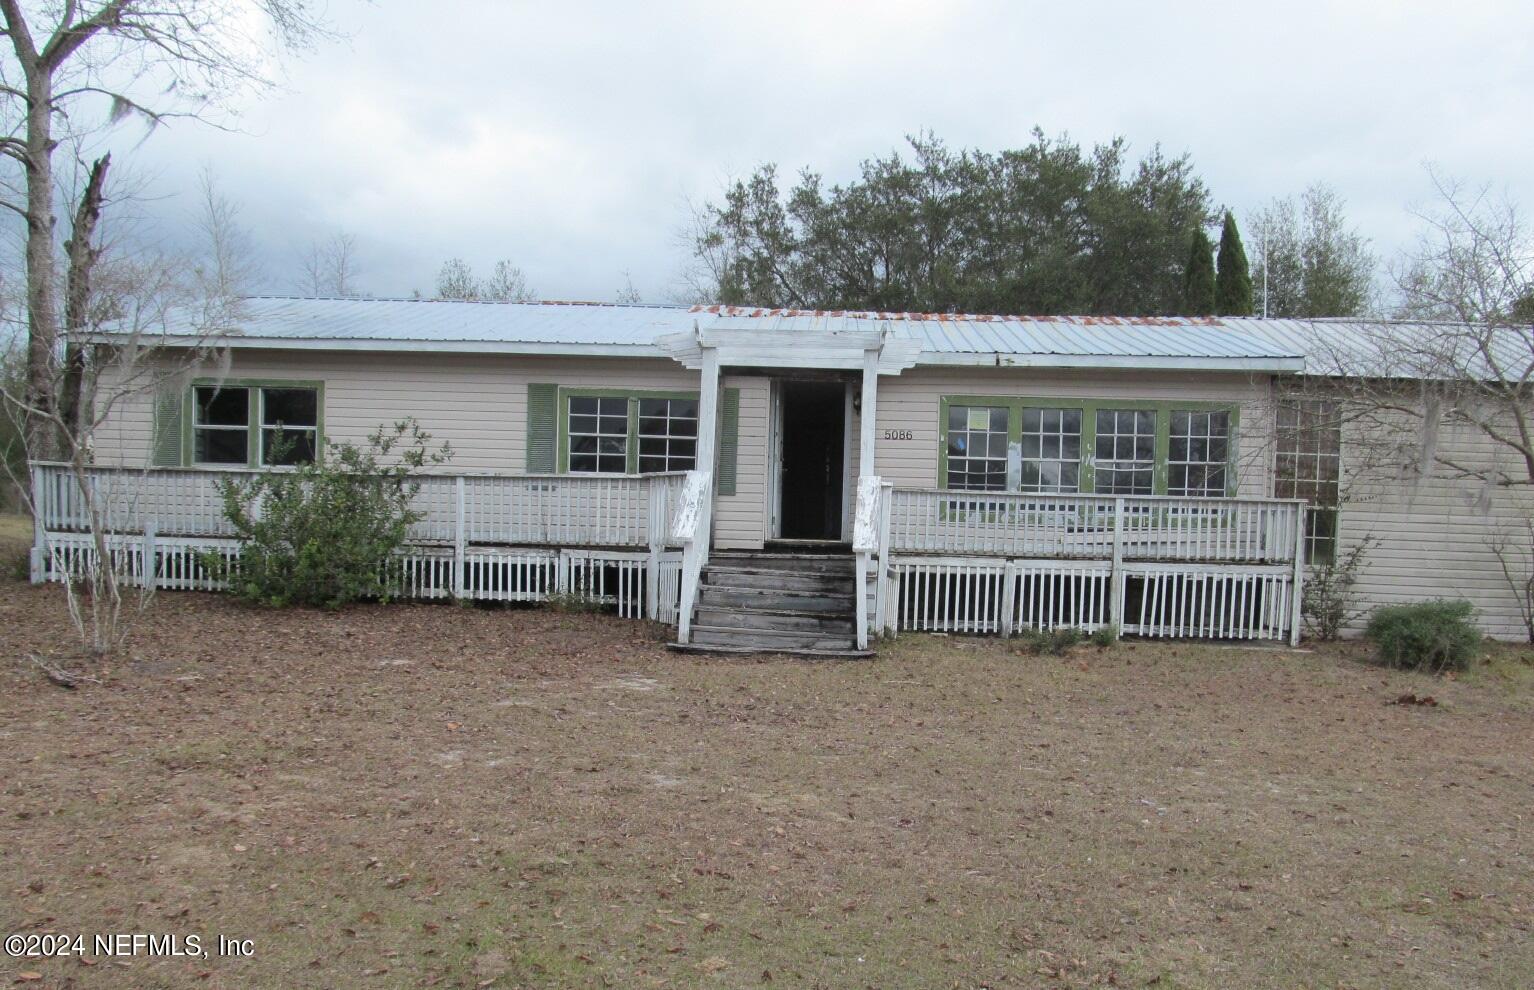 Keystone Heights, FL home for sale located at 5086 GRANNYS Place, Keystone Heights, FL 32656